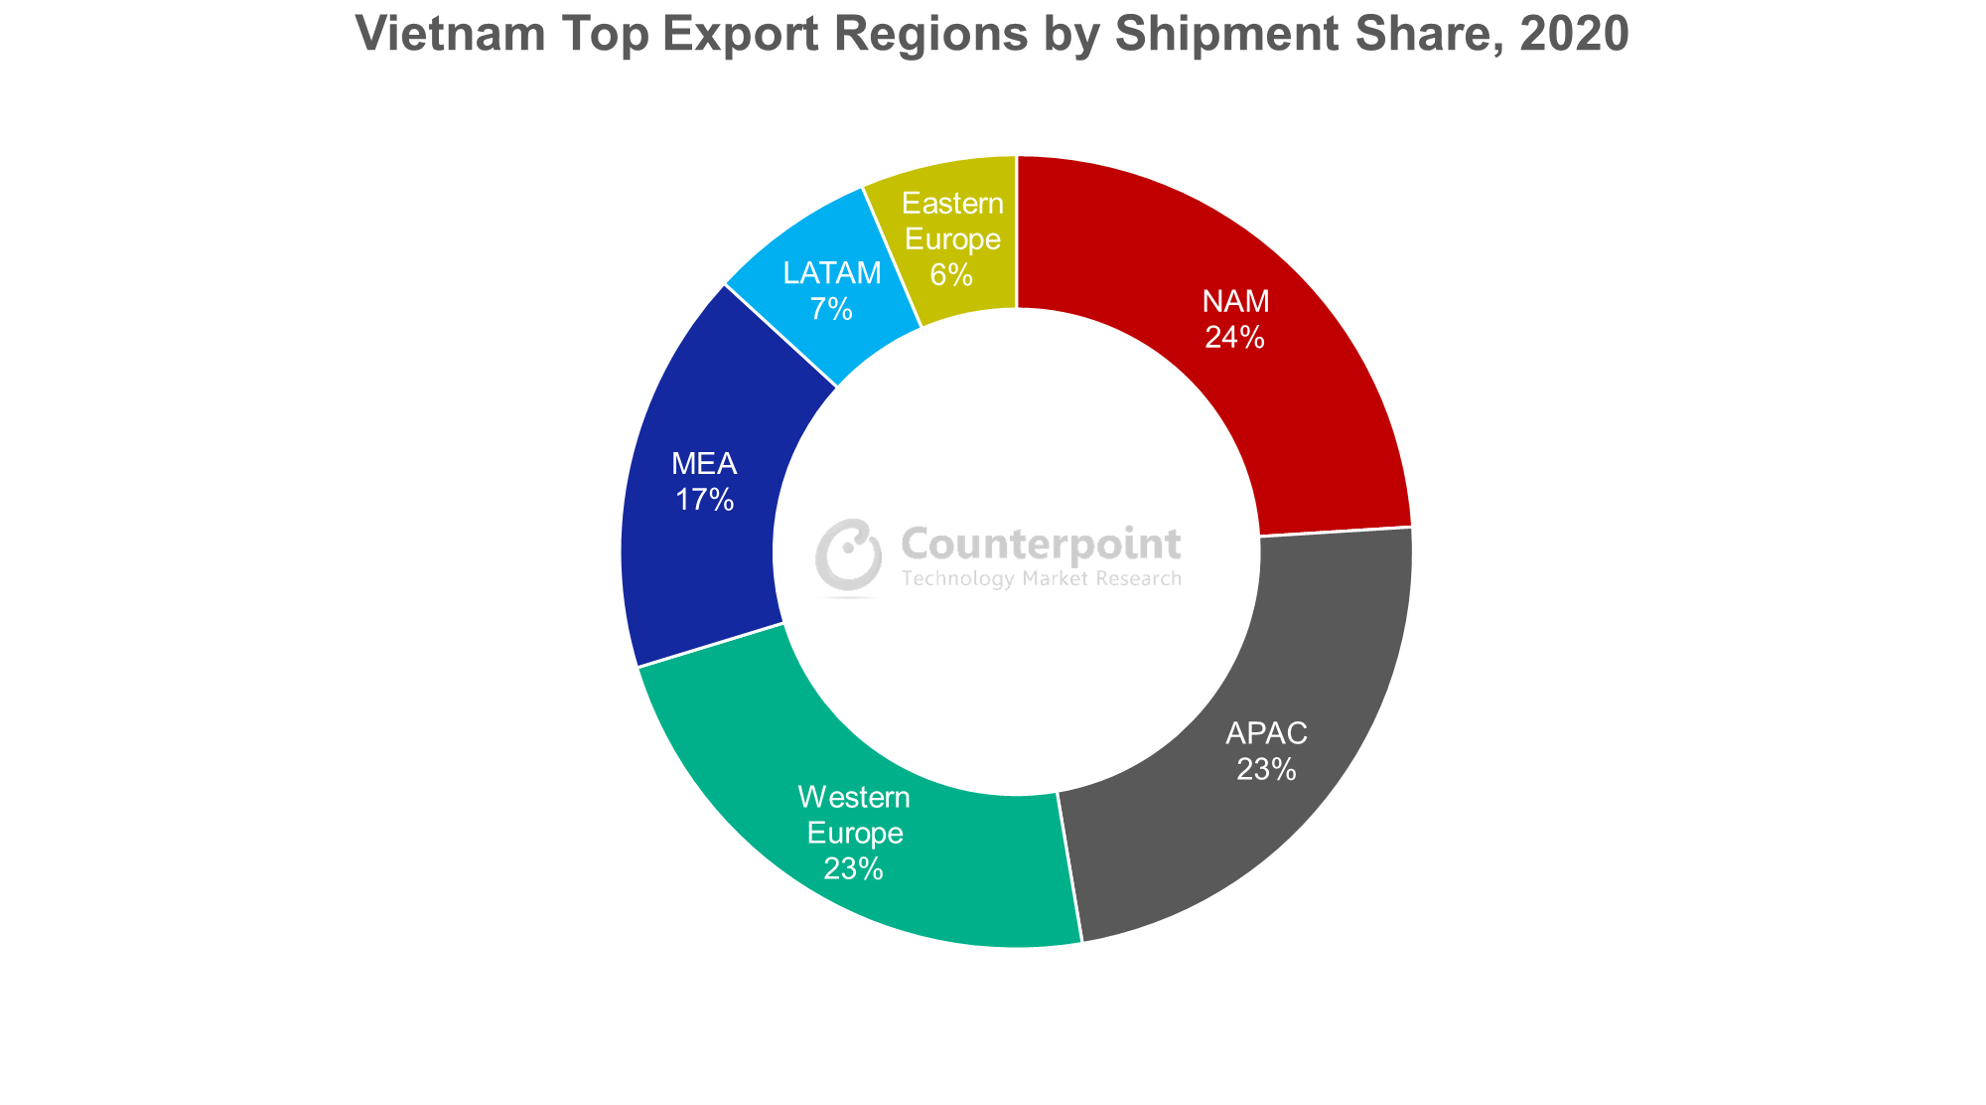 Counterpoint Research Vietnam Top Export Regions by Shipment Share, 2020